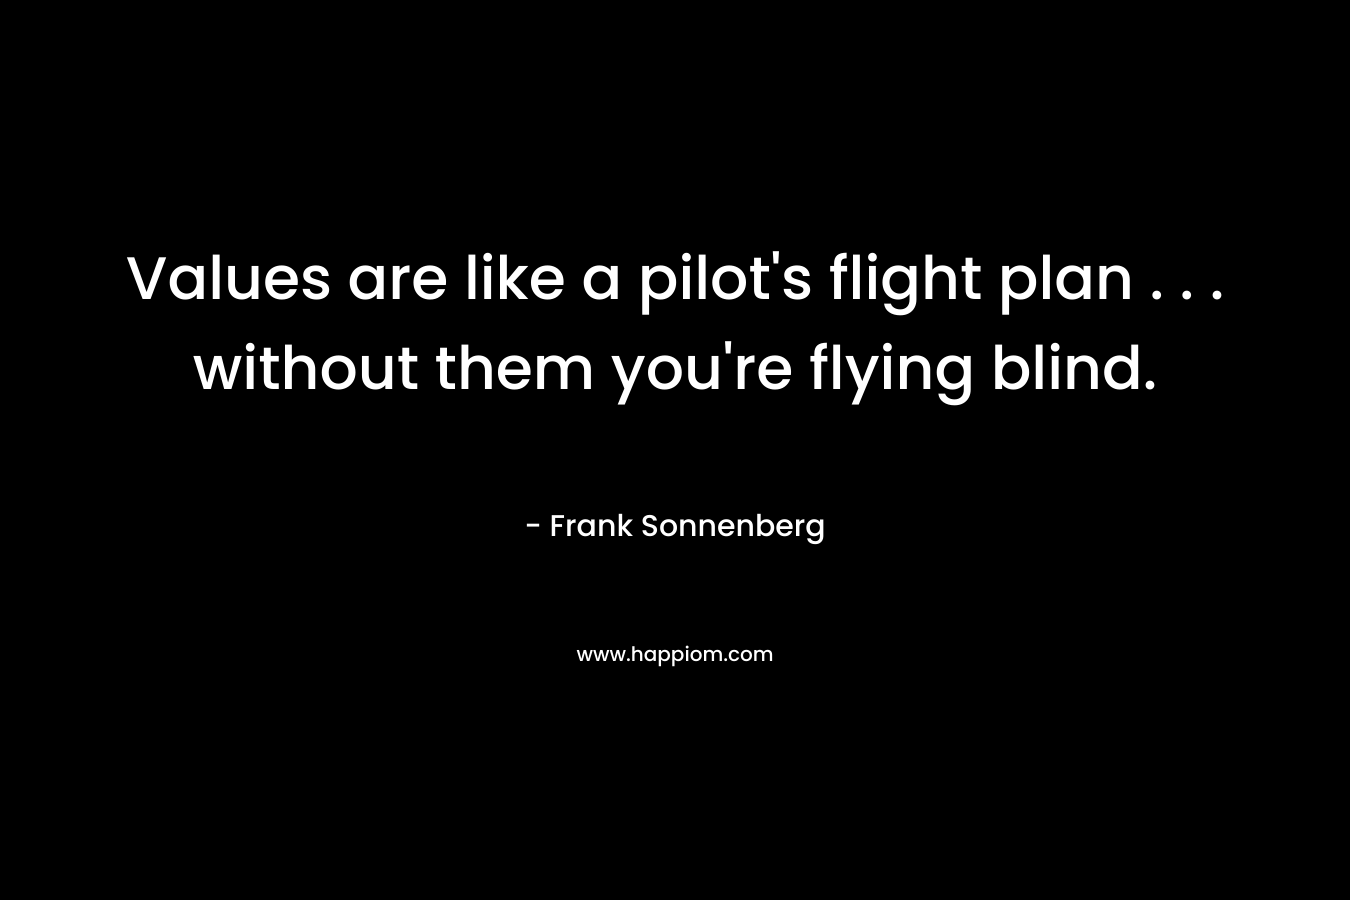 Values are like a pilot's flight plan . . . without them you're flying blind.